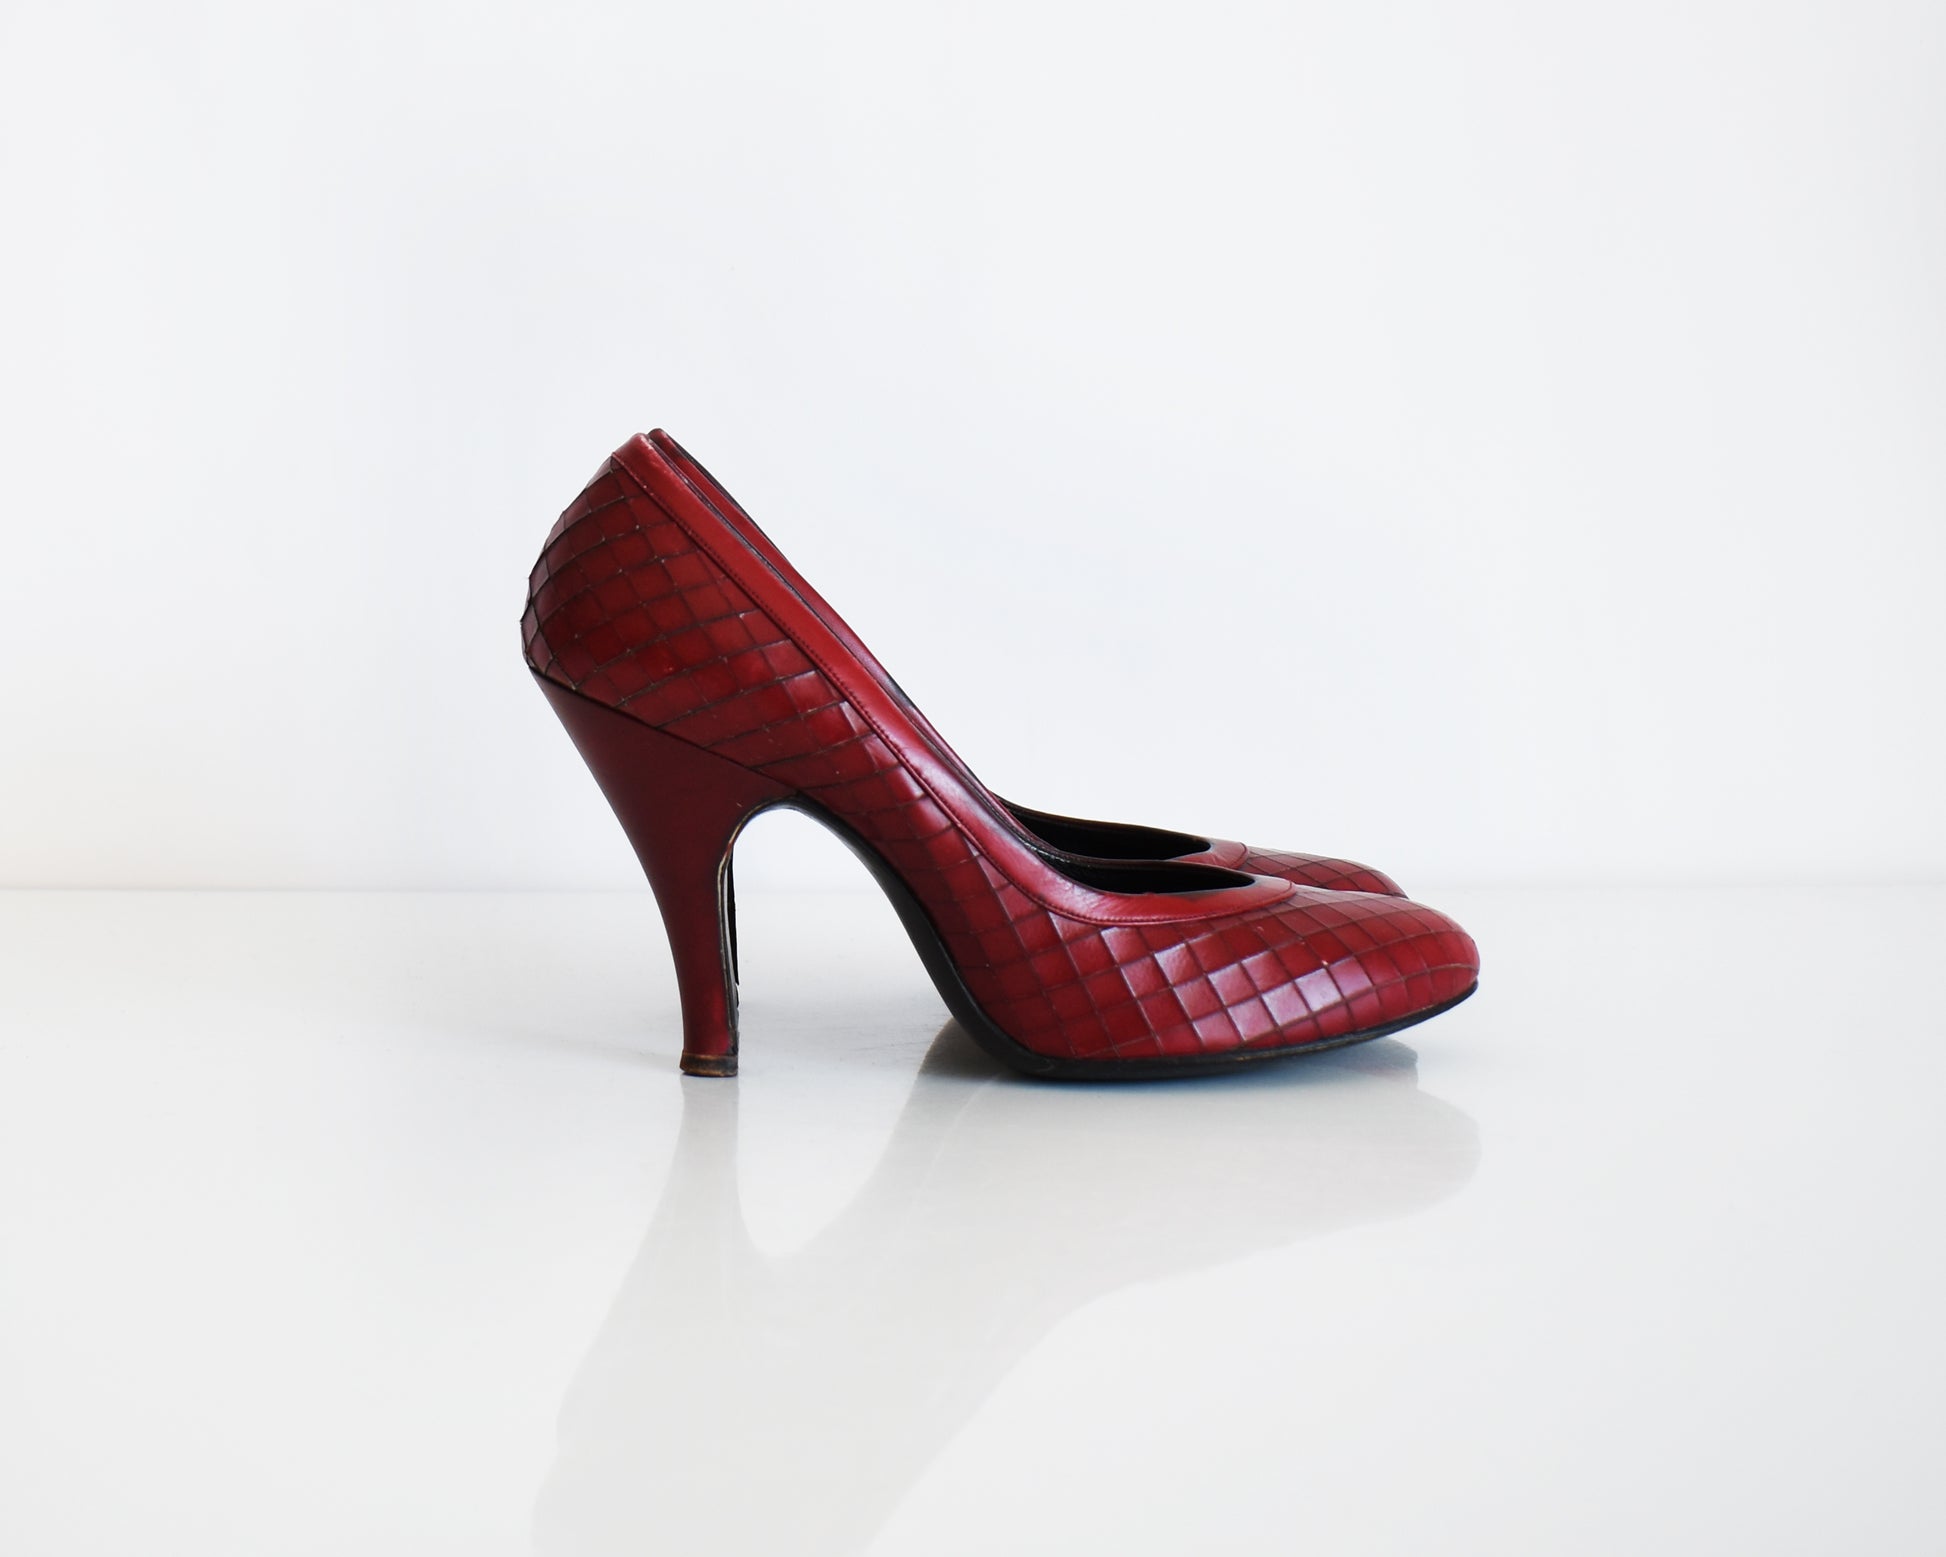 side view of a pair of vintage 1960s burgundy criss-cross pattern high heels